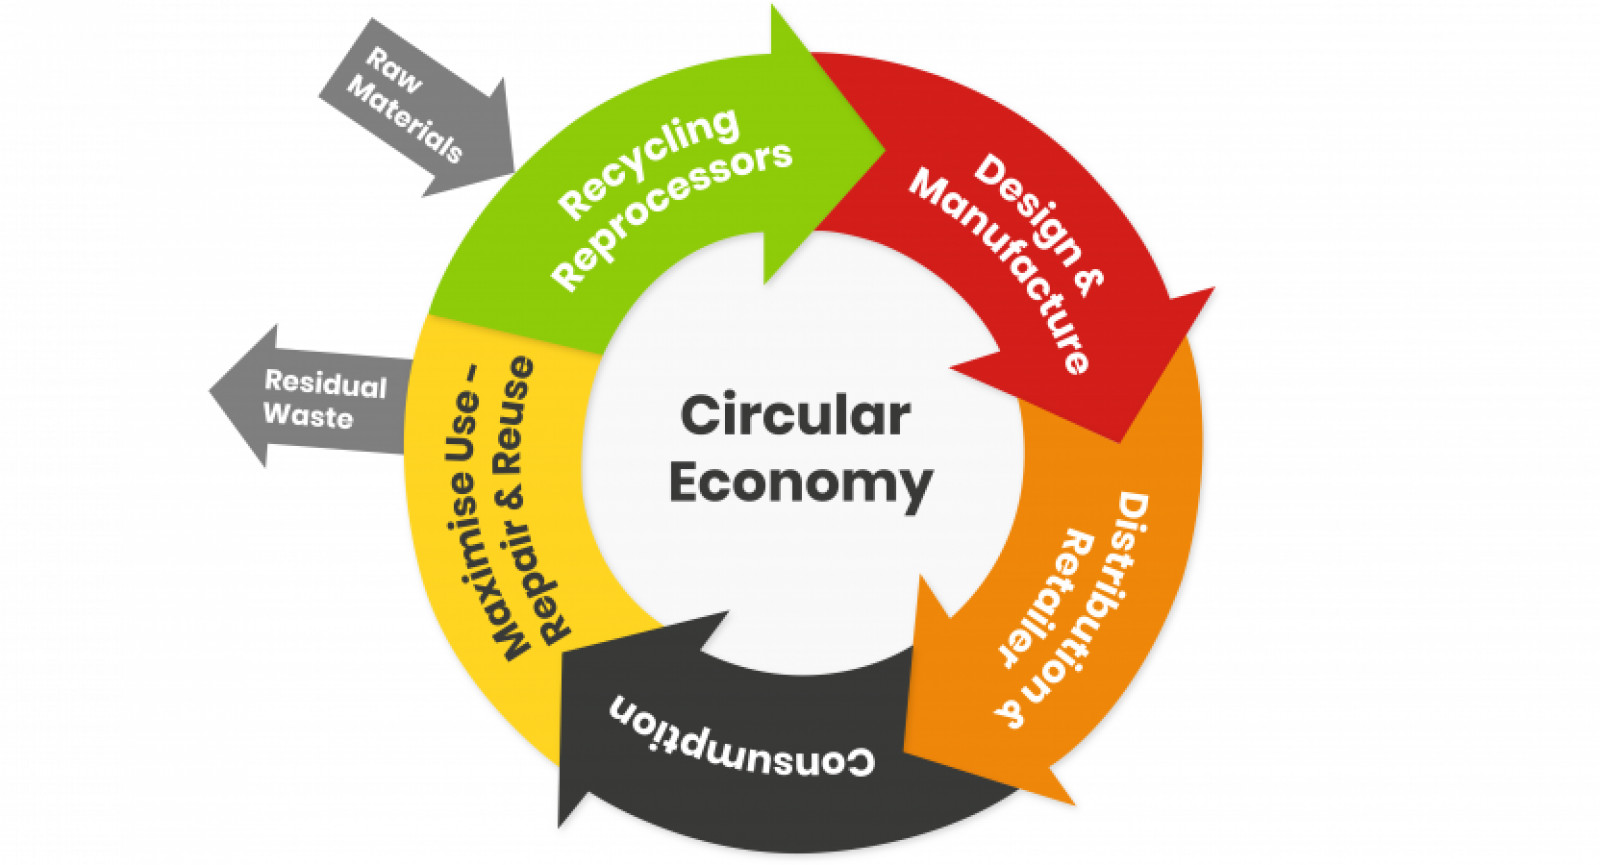 A circular economy, is a better economy